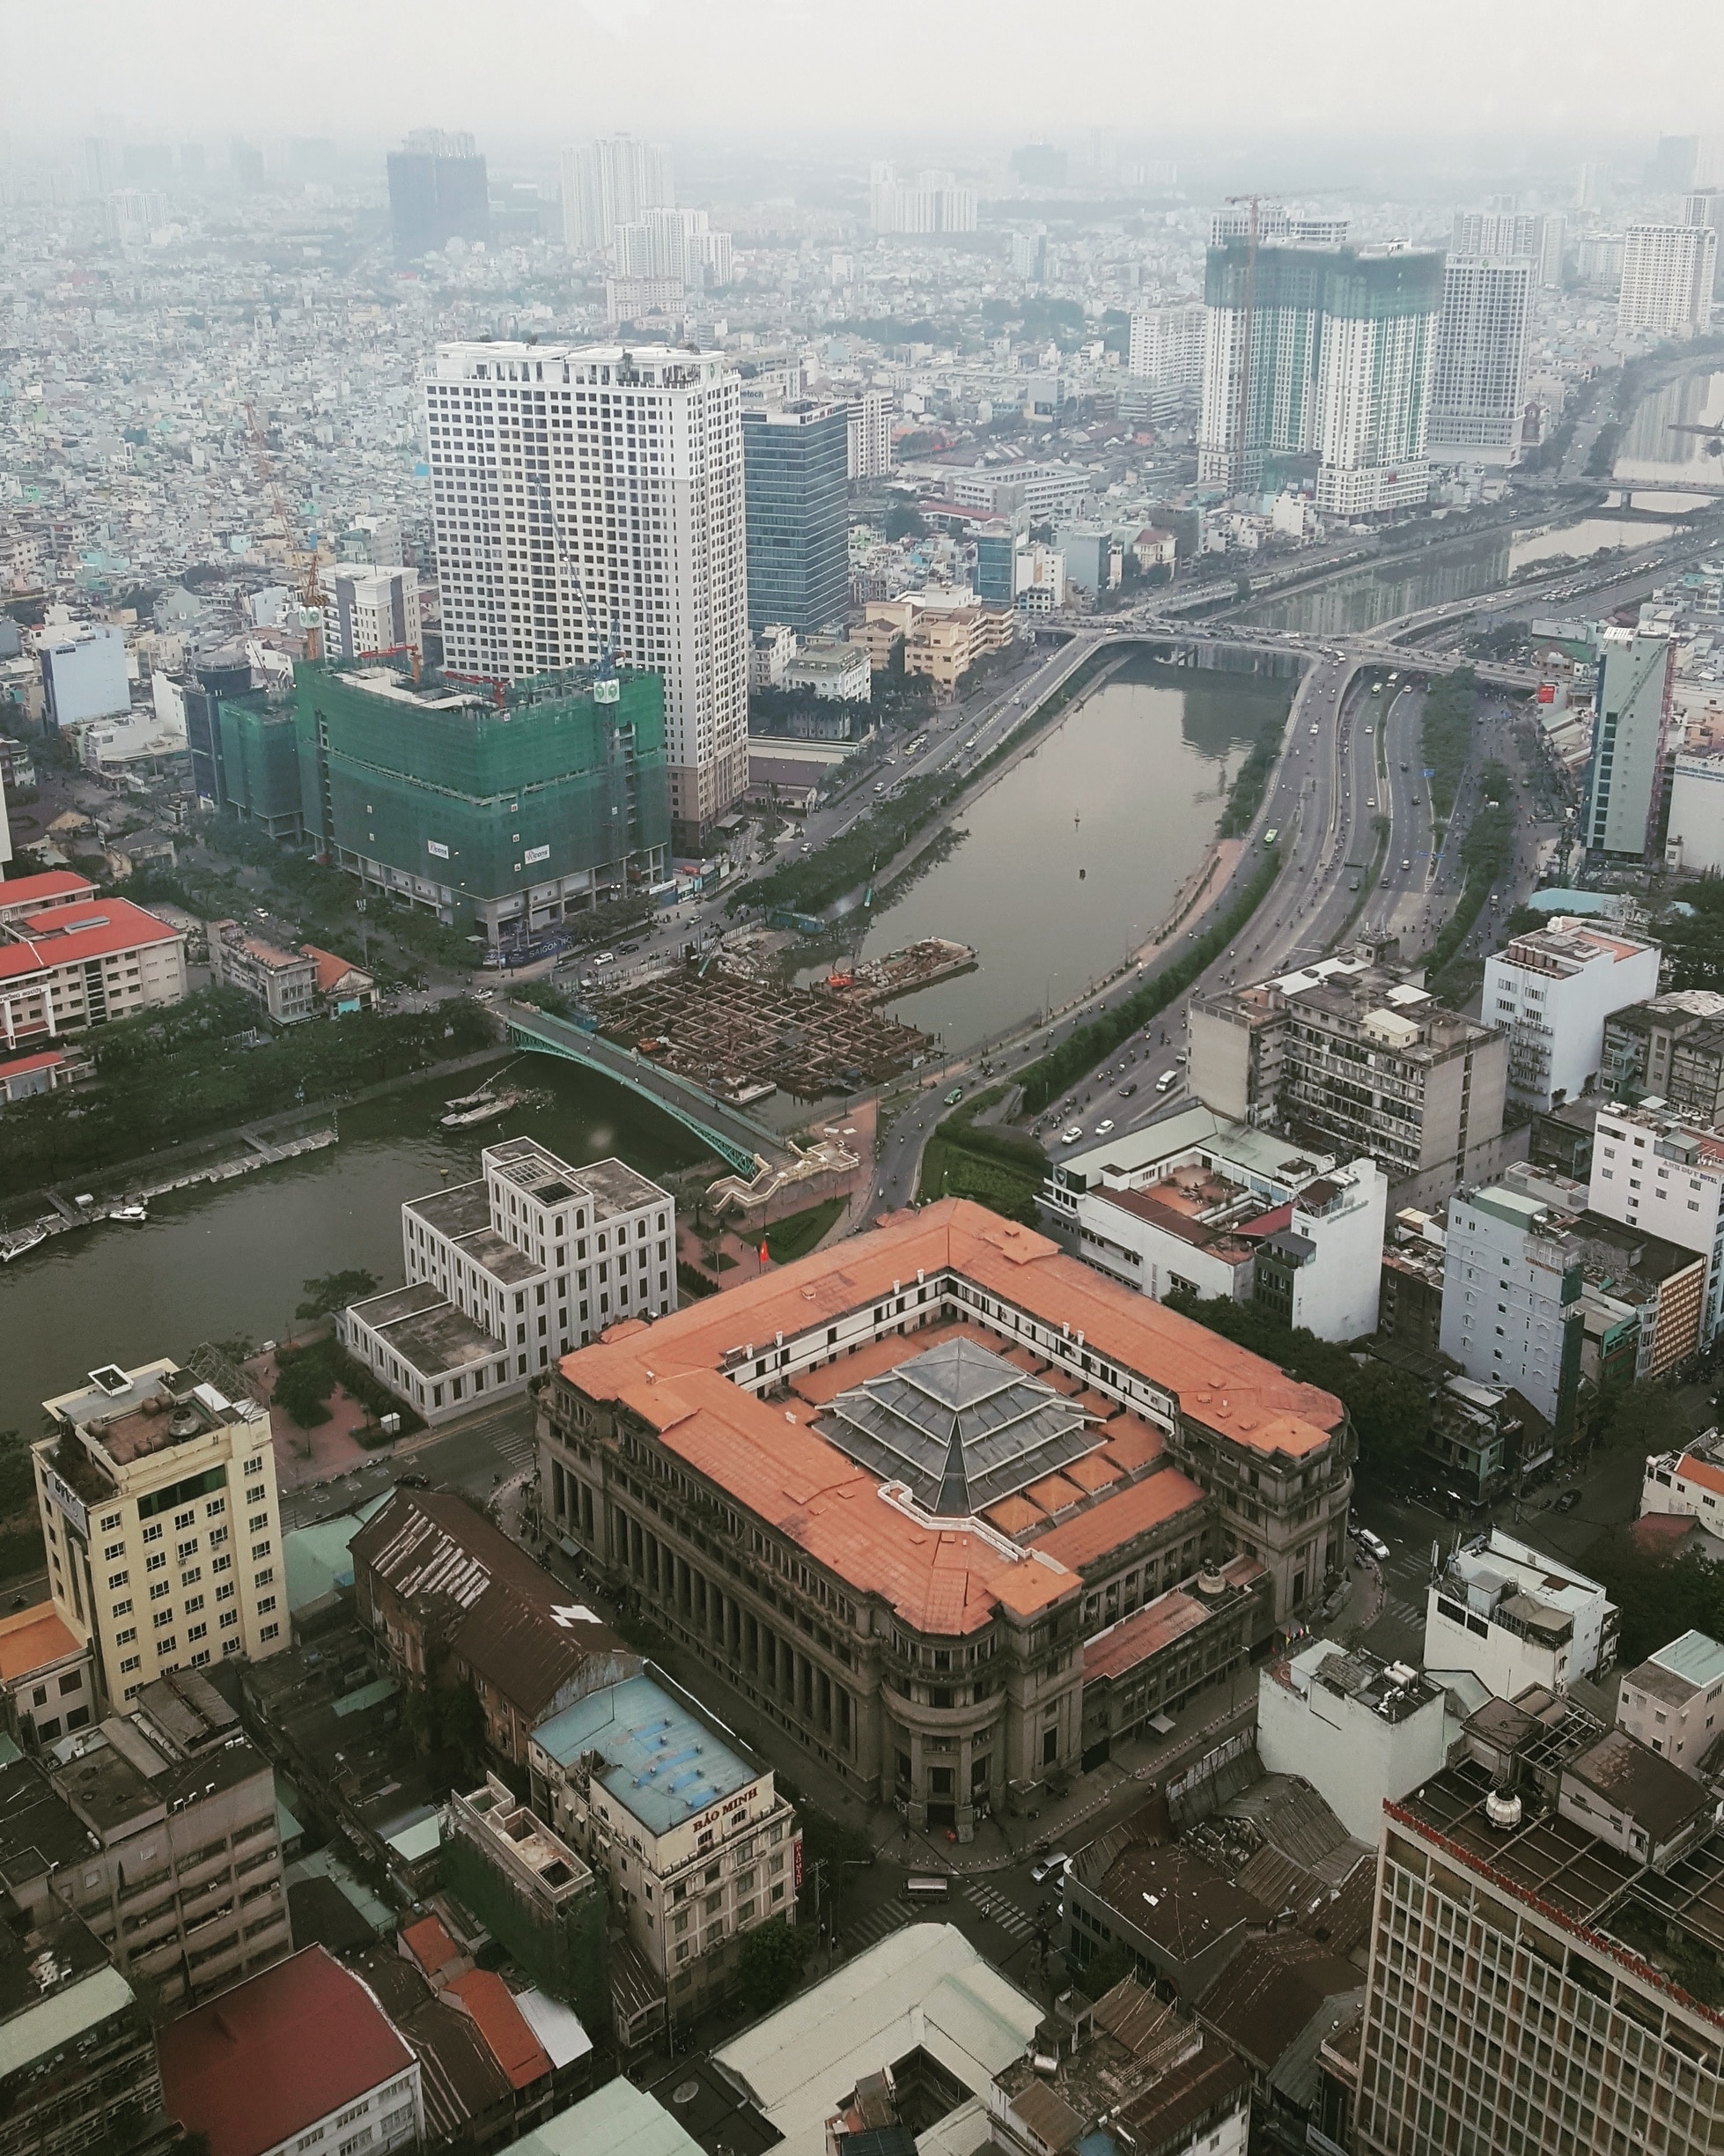 Views from Bitexco Financial Tower & Saigon Skydeck (49th floor). There's also the 'World of Heineken' discovery centre on the 58-60th floors. A must-do while in Ho Chi Minh City!

#hochiminh #hochiminhcity #hcmc #saigon #vietnam #bitexco #UrbanJungle 